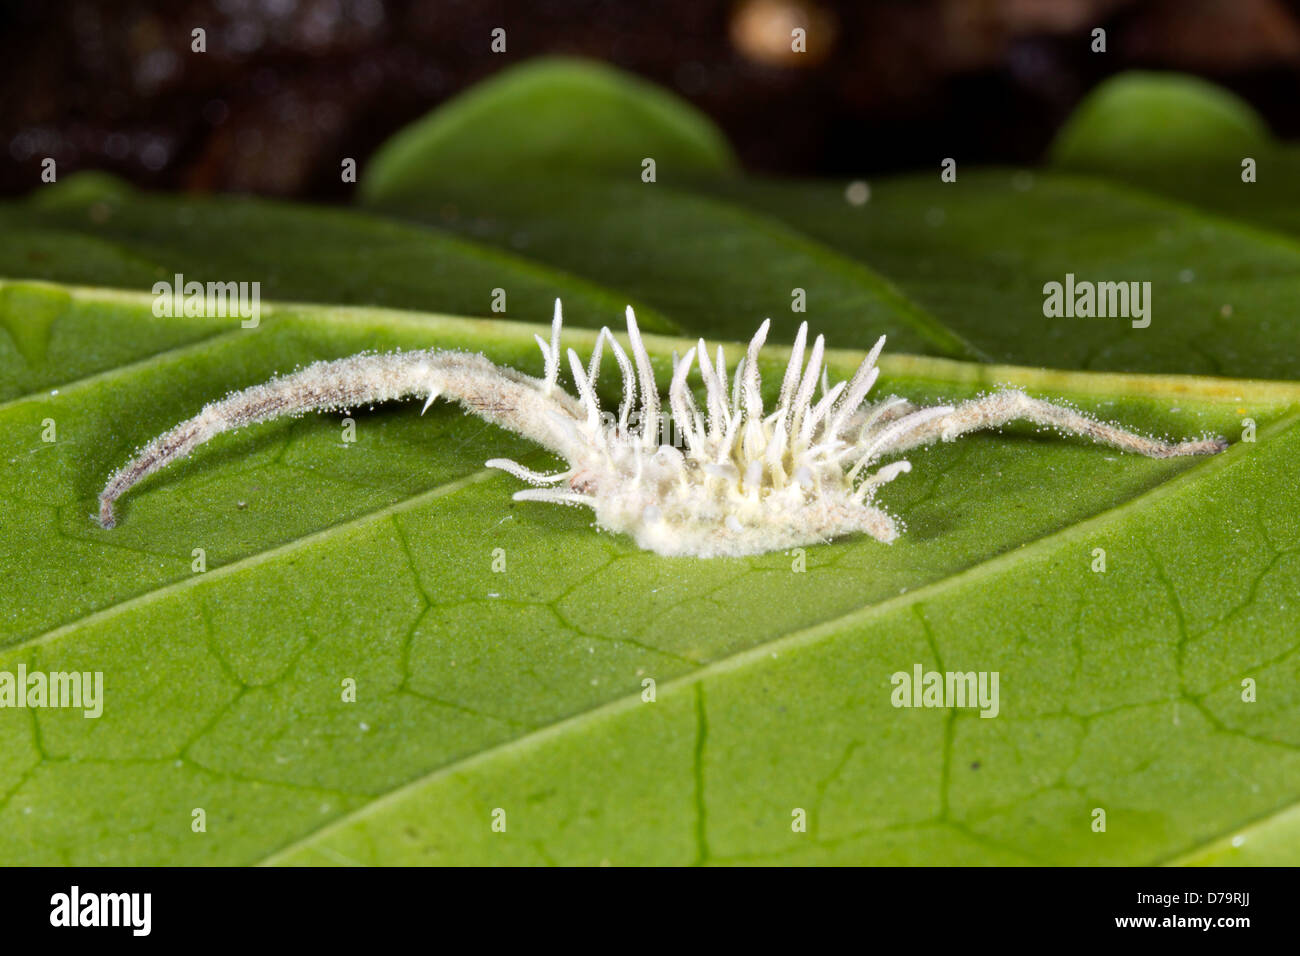 Cordyceps fungus (Gibellula sp.) infecting a spider in the rainforest understory, Ecuador Stock Photo